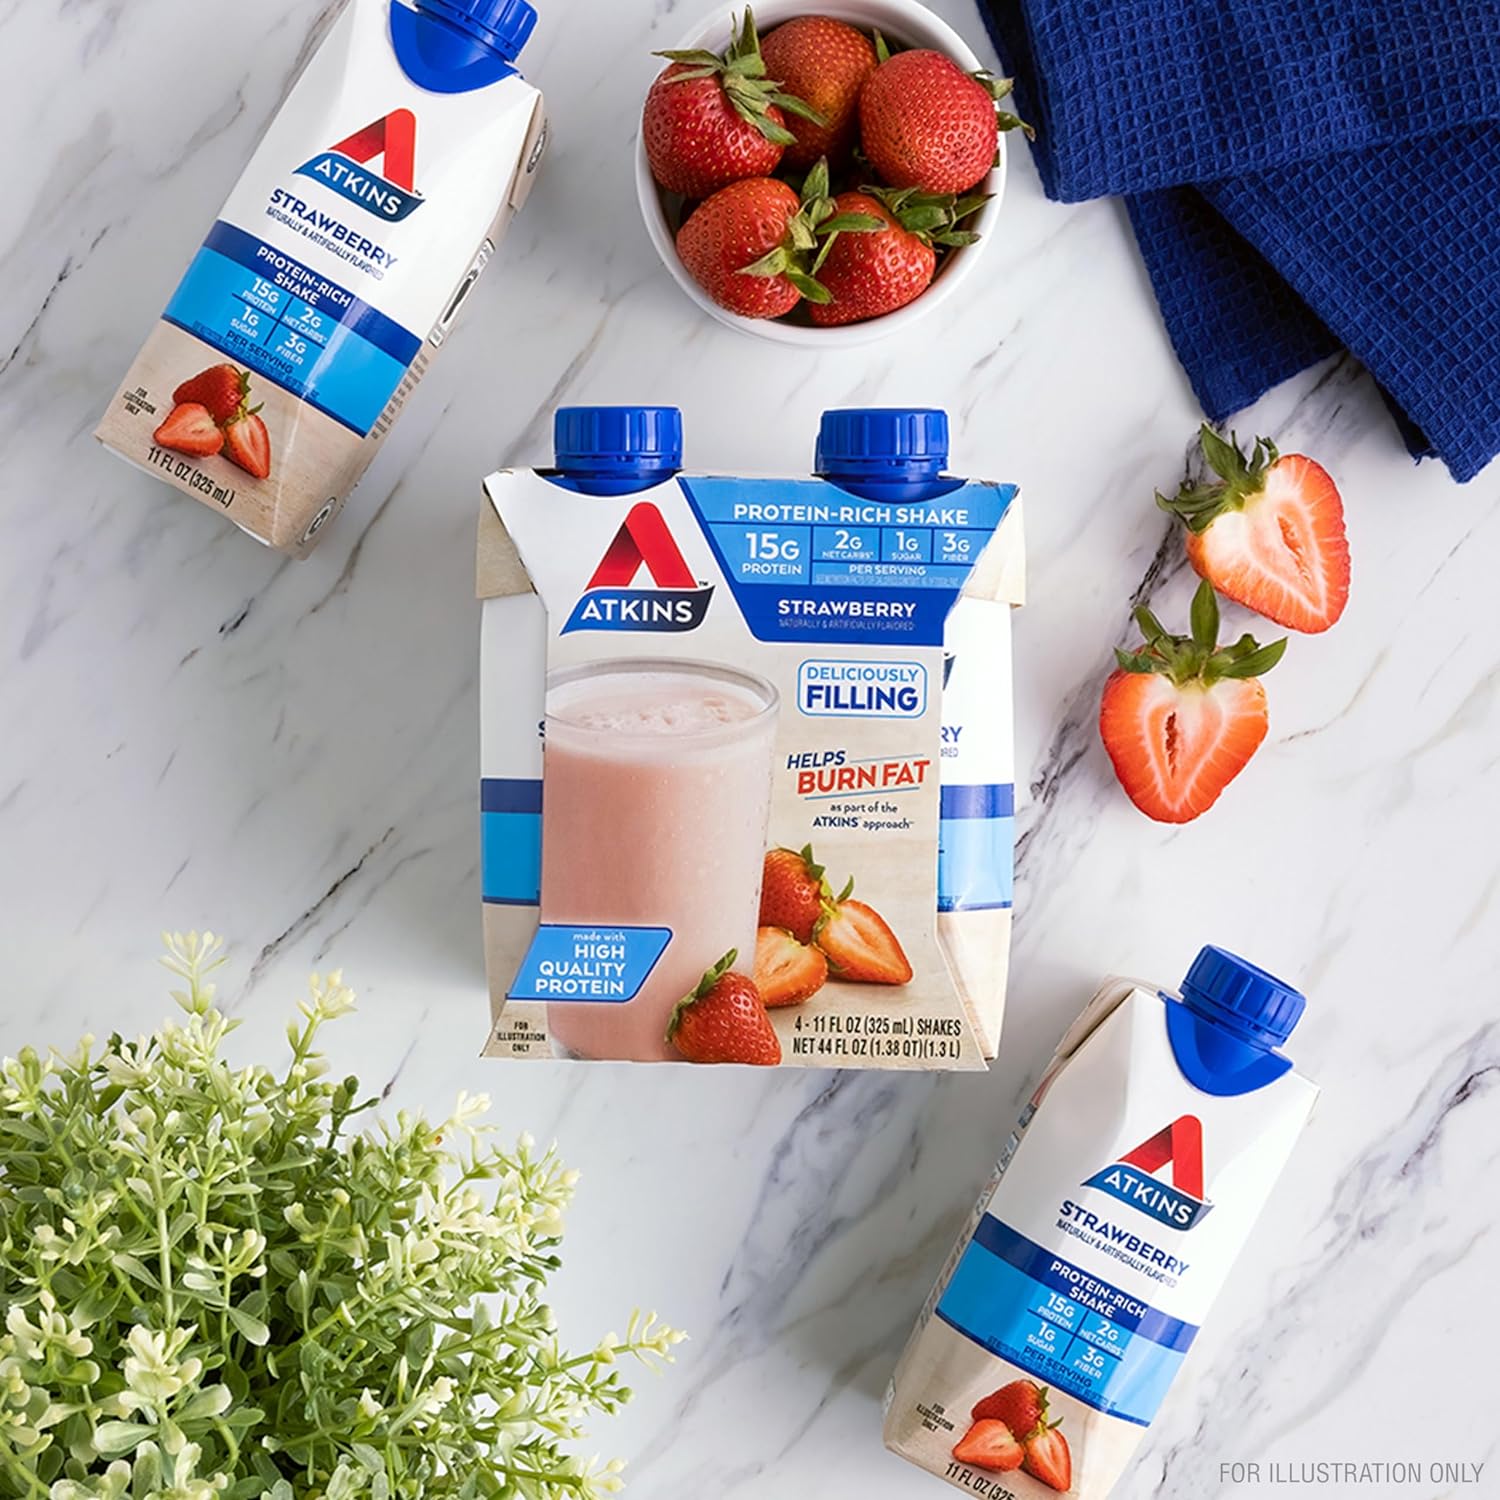 Atkins Strawberry Protein Shake, 15g Protein, Low Glycemic, 2g Net Carb, 1g Sugar, Keto Friendly, 12 Count : Health & Household